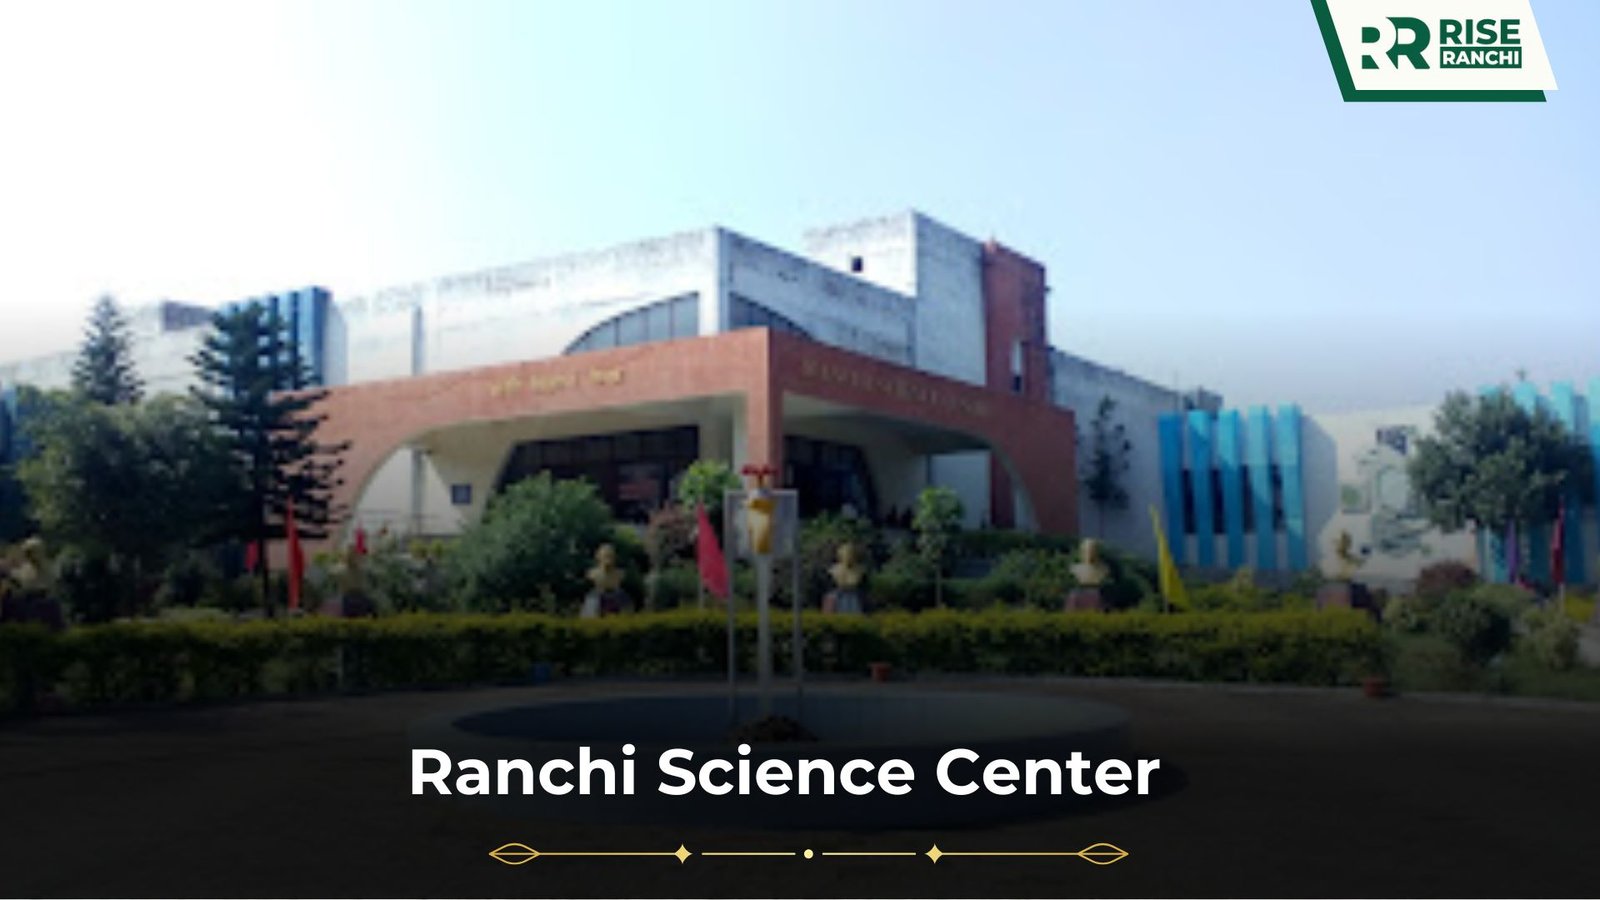 Ranchi Science Center: India's Hidden Gem Where Science Comes Alive!